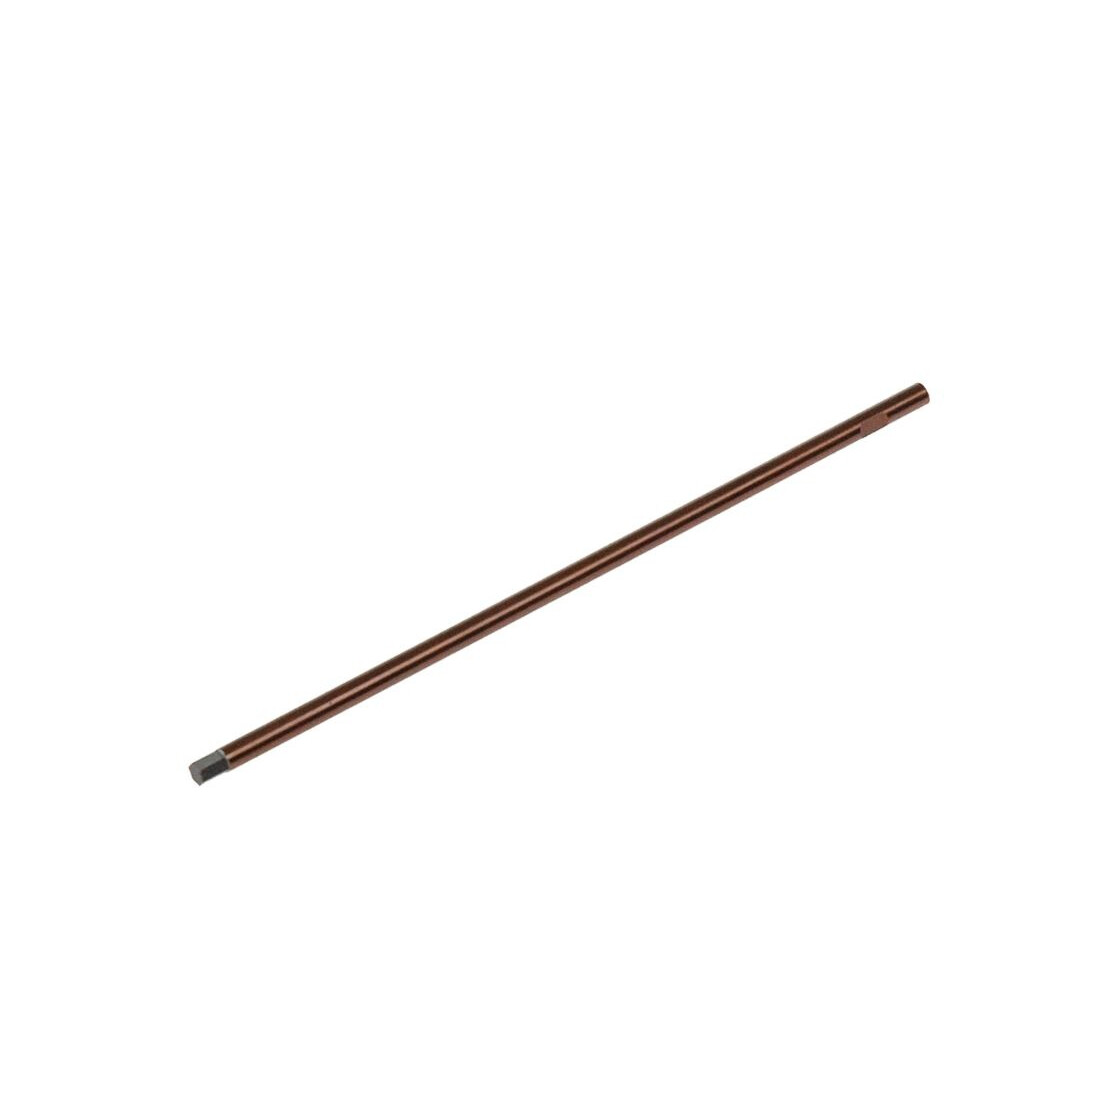 ALLEN WRENCH 3.0 X 120MM TIP ONLY